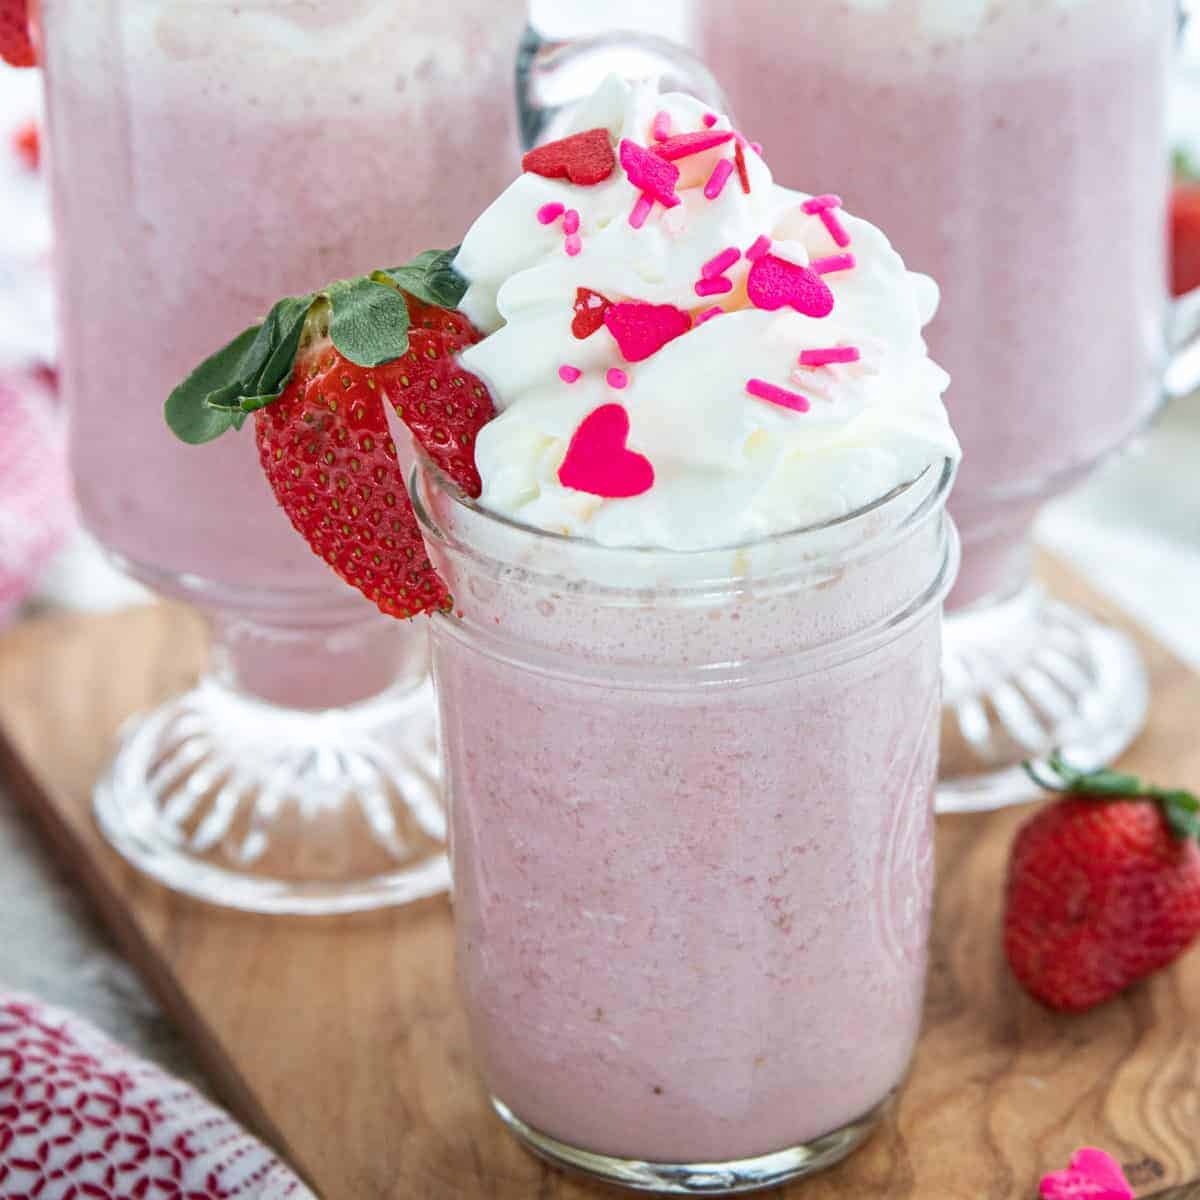 pink hot chocolate in a glass mug topped with whipped cream and a fresh strawberry.